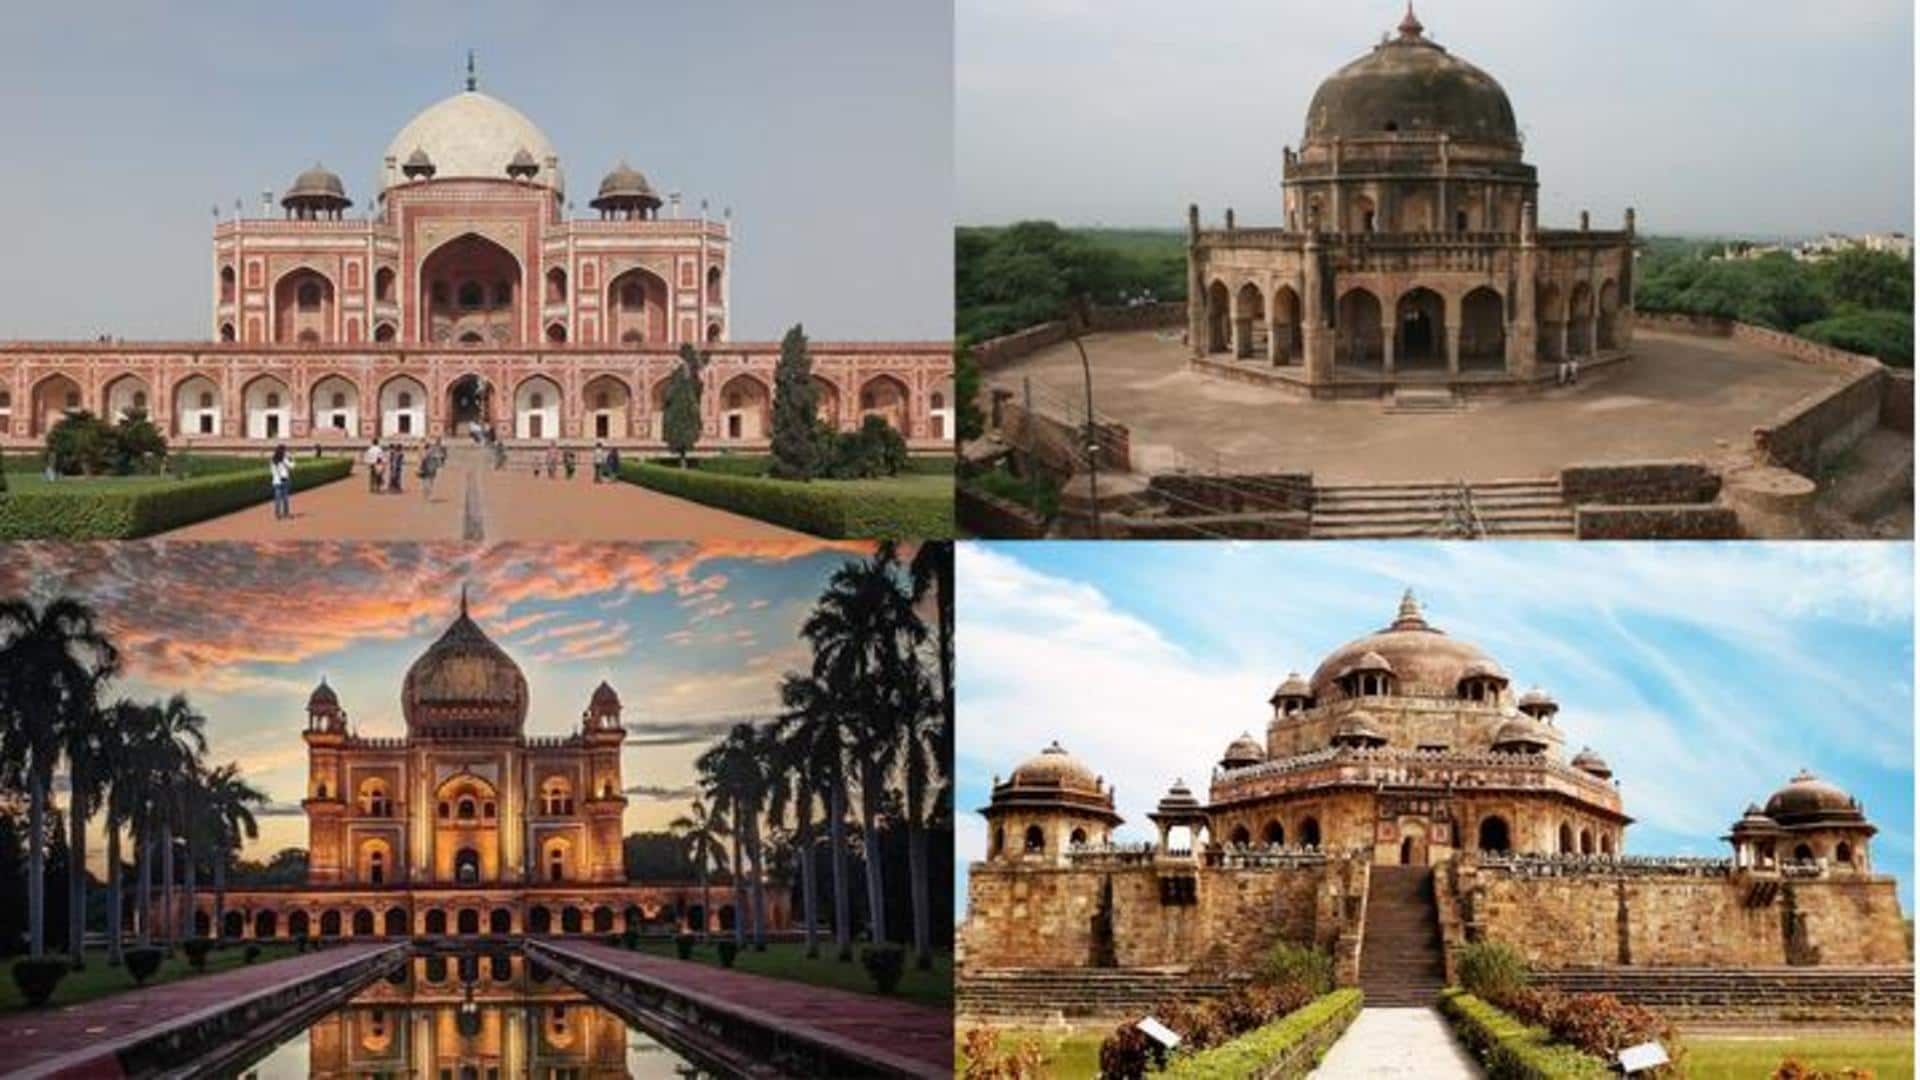 India's must-see historical tombs: Top 5 recommendations